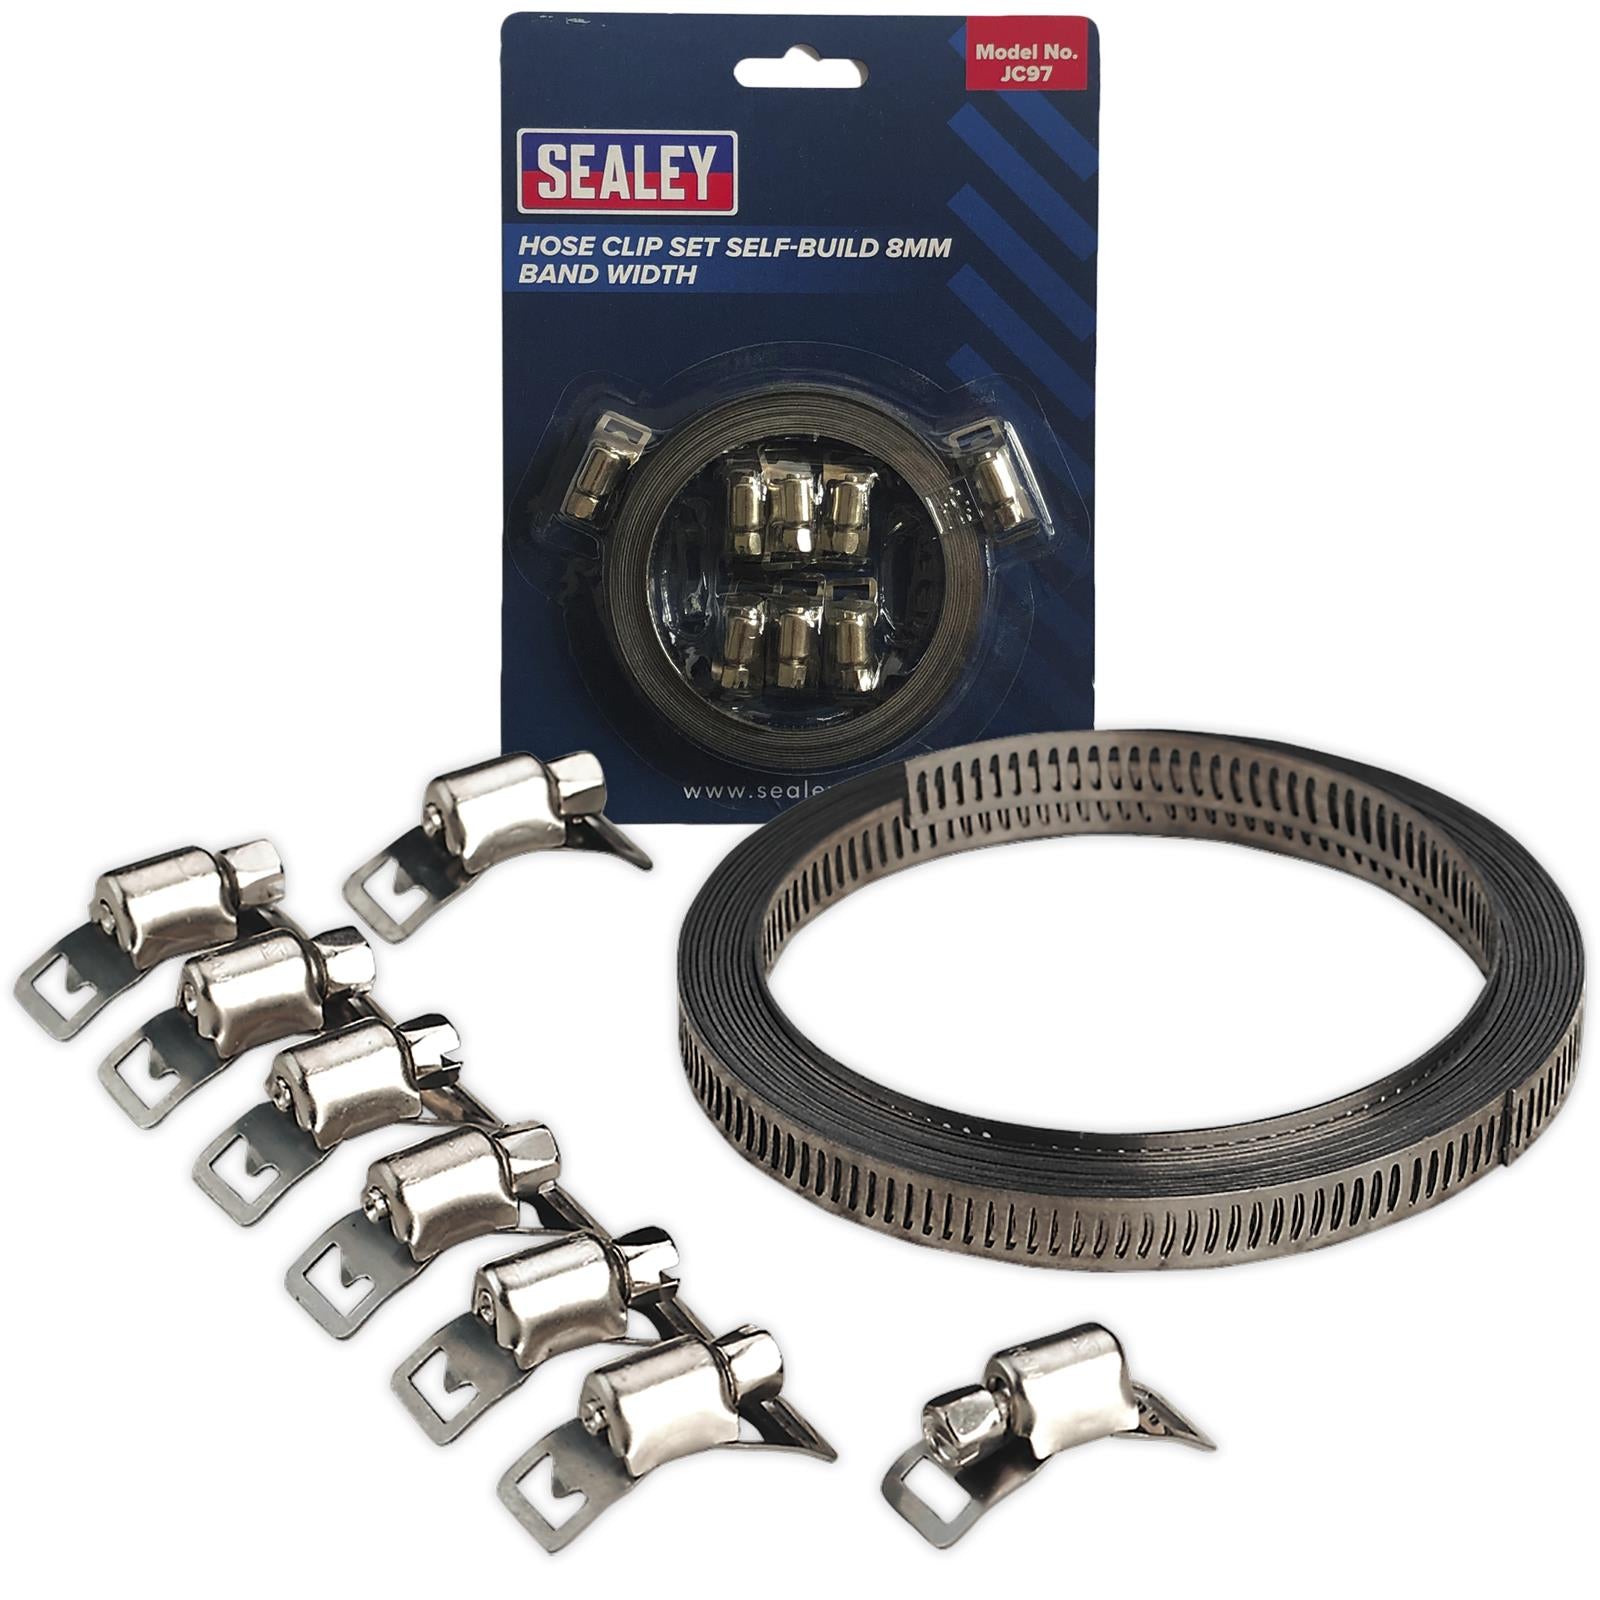 Sealey Hose Clamp Set Self Build 8mm Band Width with 8 Tension Clamps